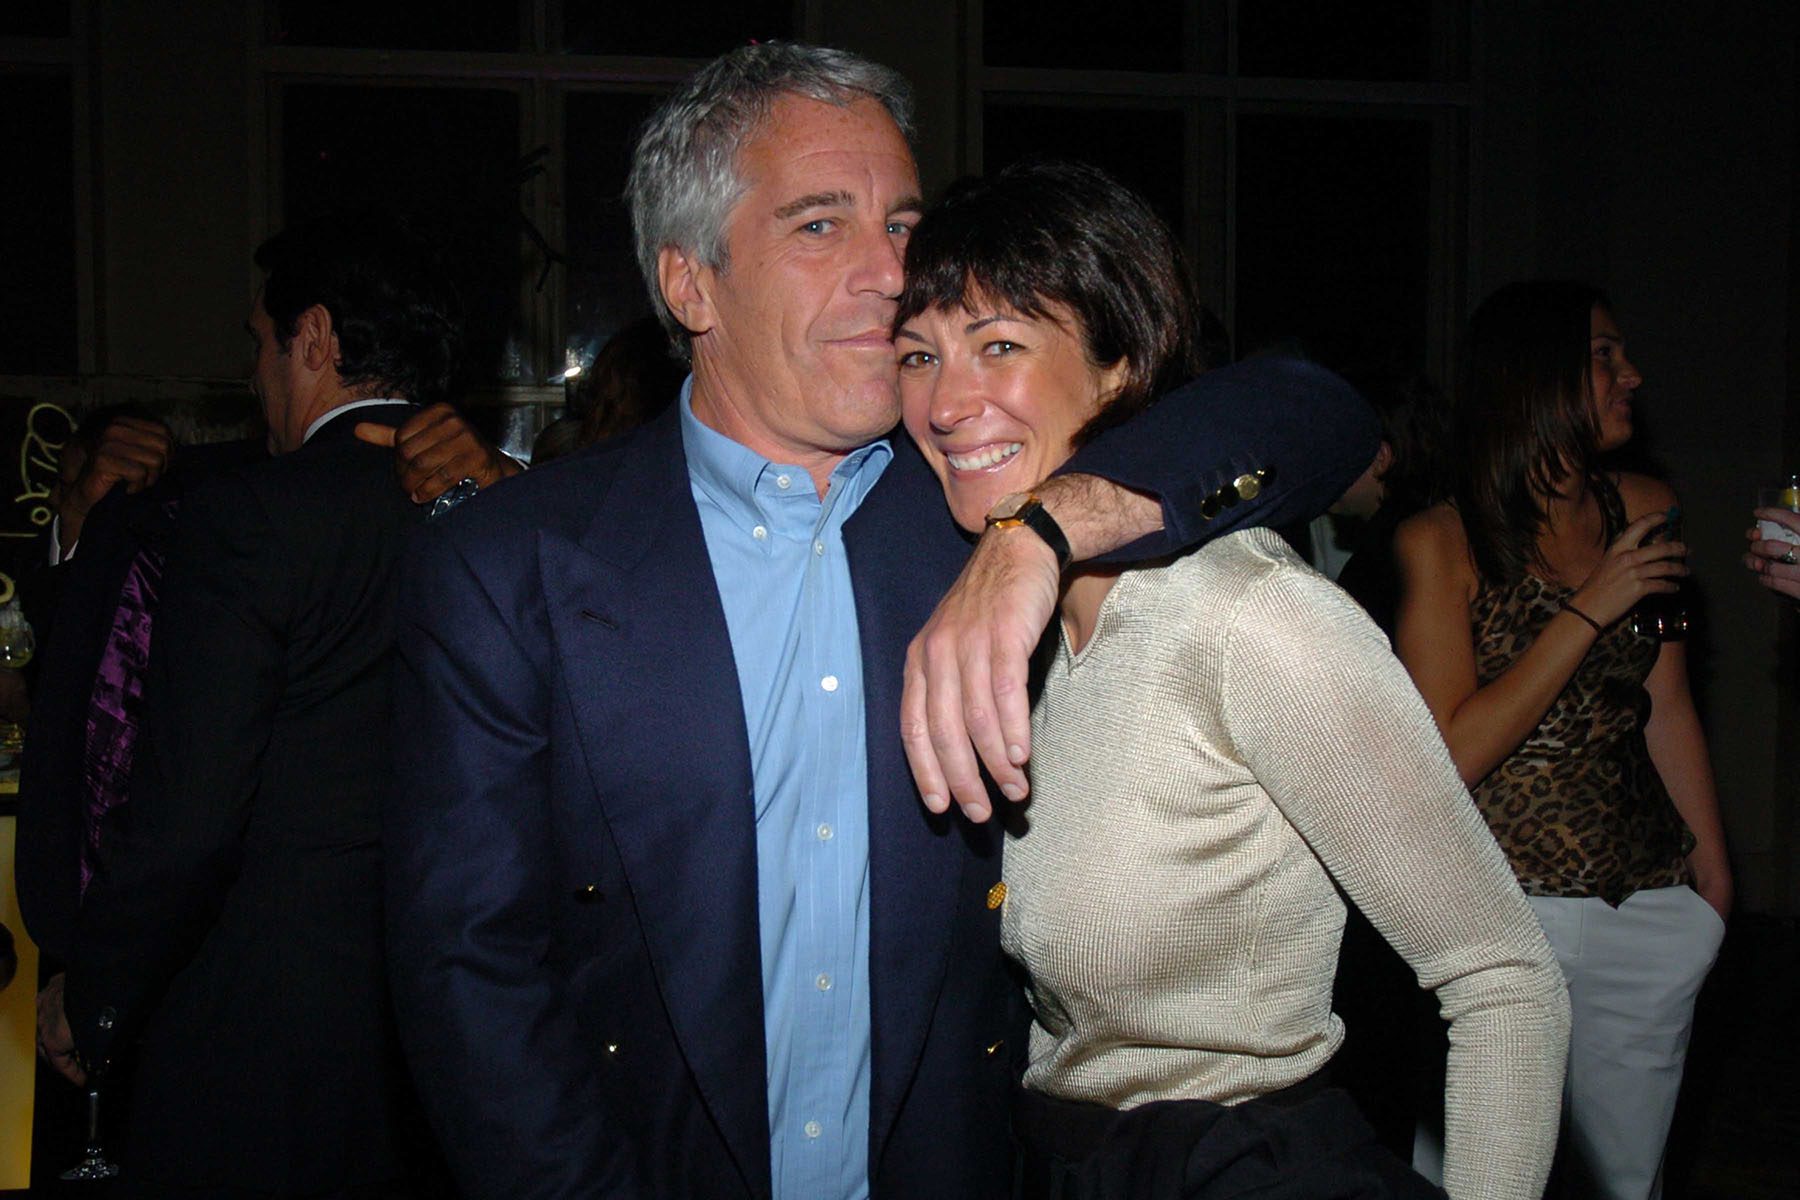 Jeffrey Epstein holds Ghislaine Maxwell at a New York City event.